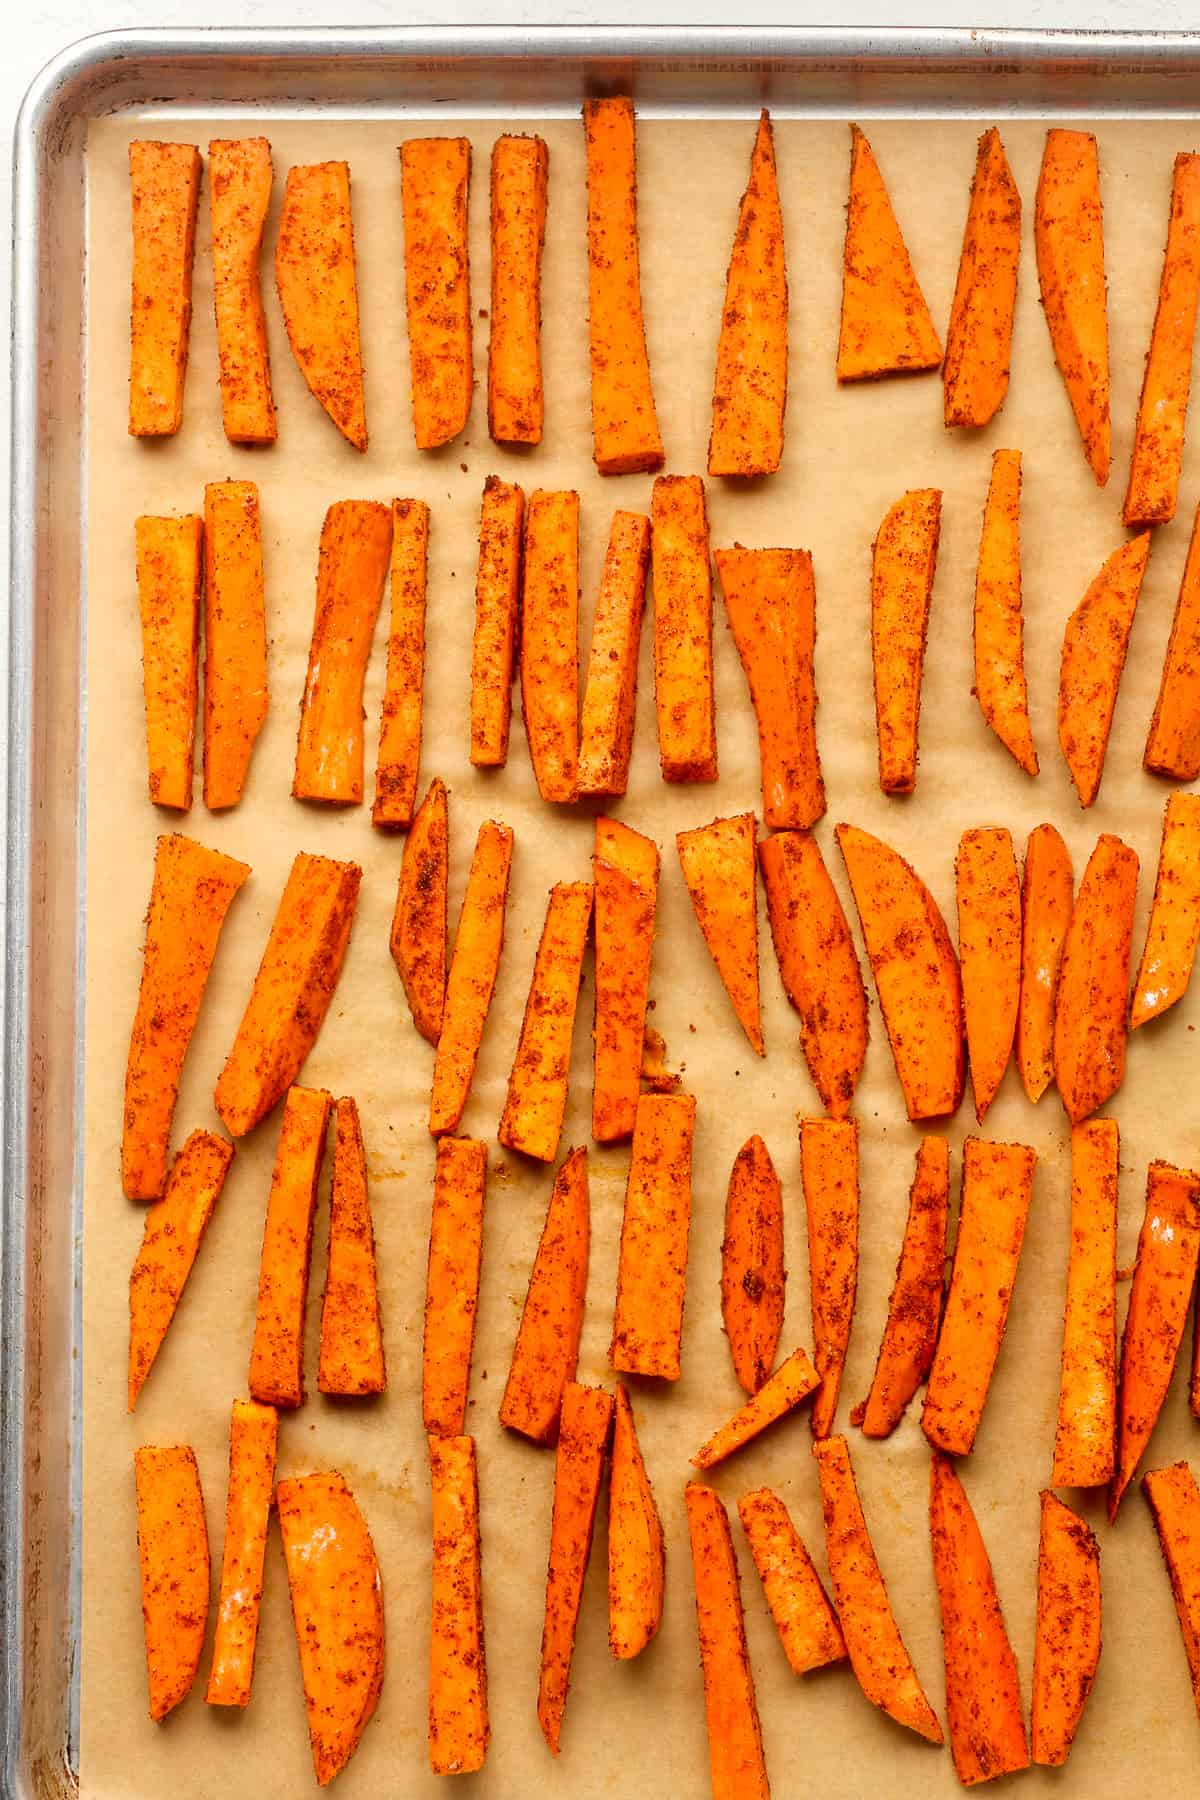 A pan of the sweet potato fries before baking.